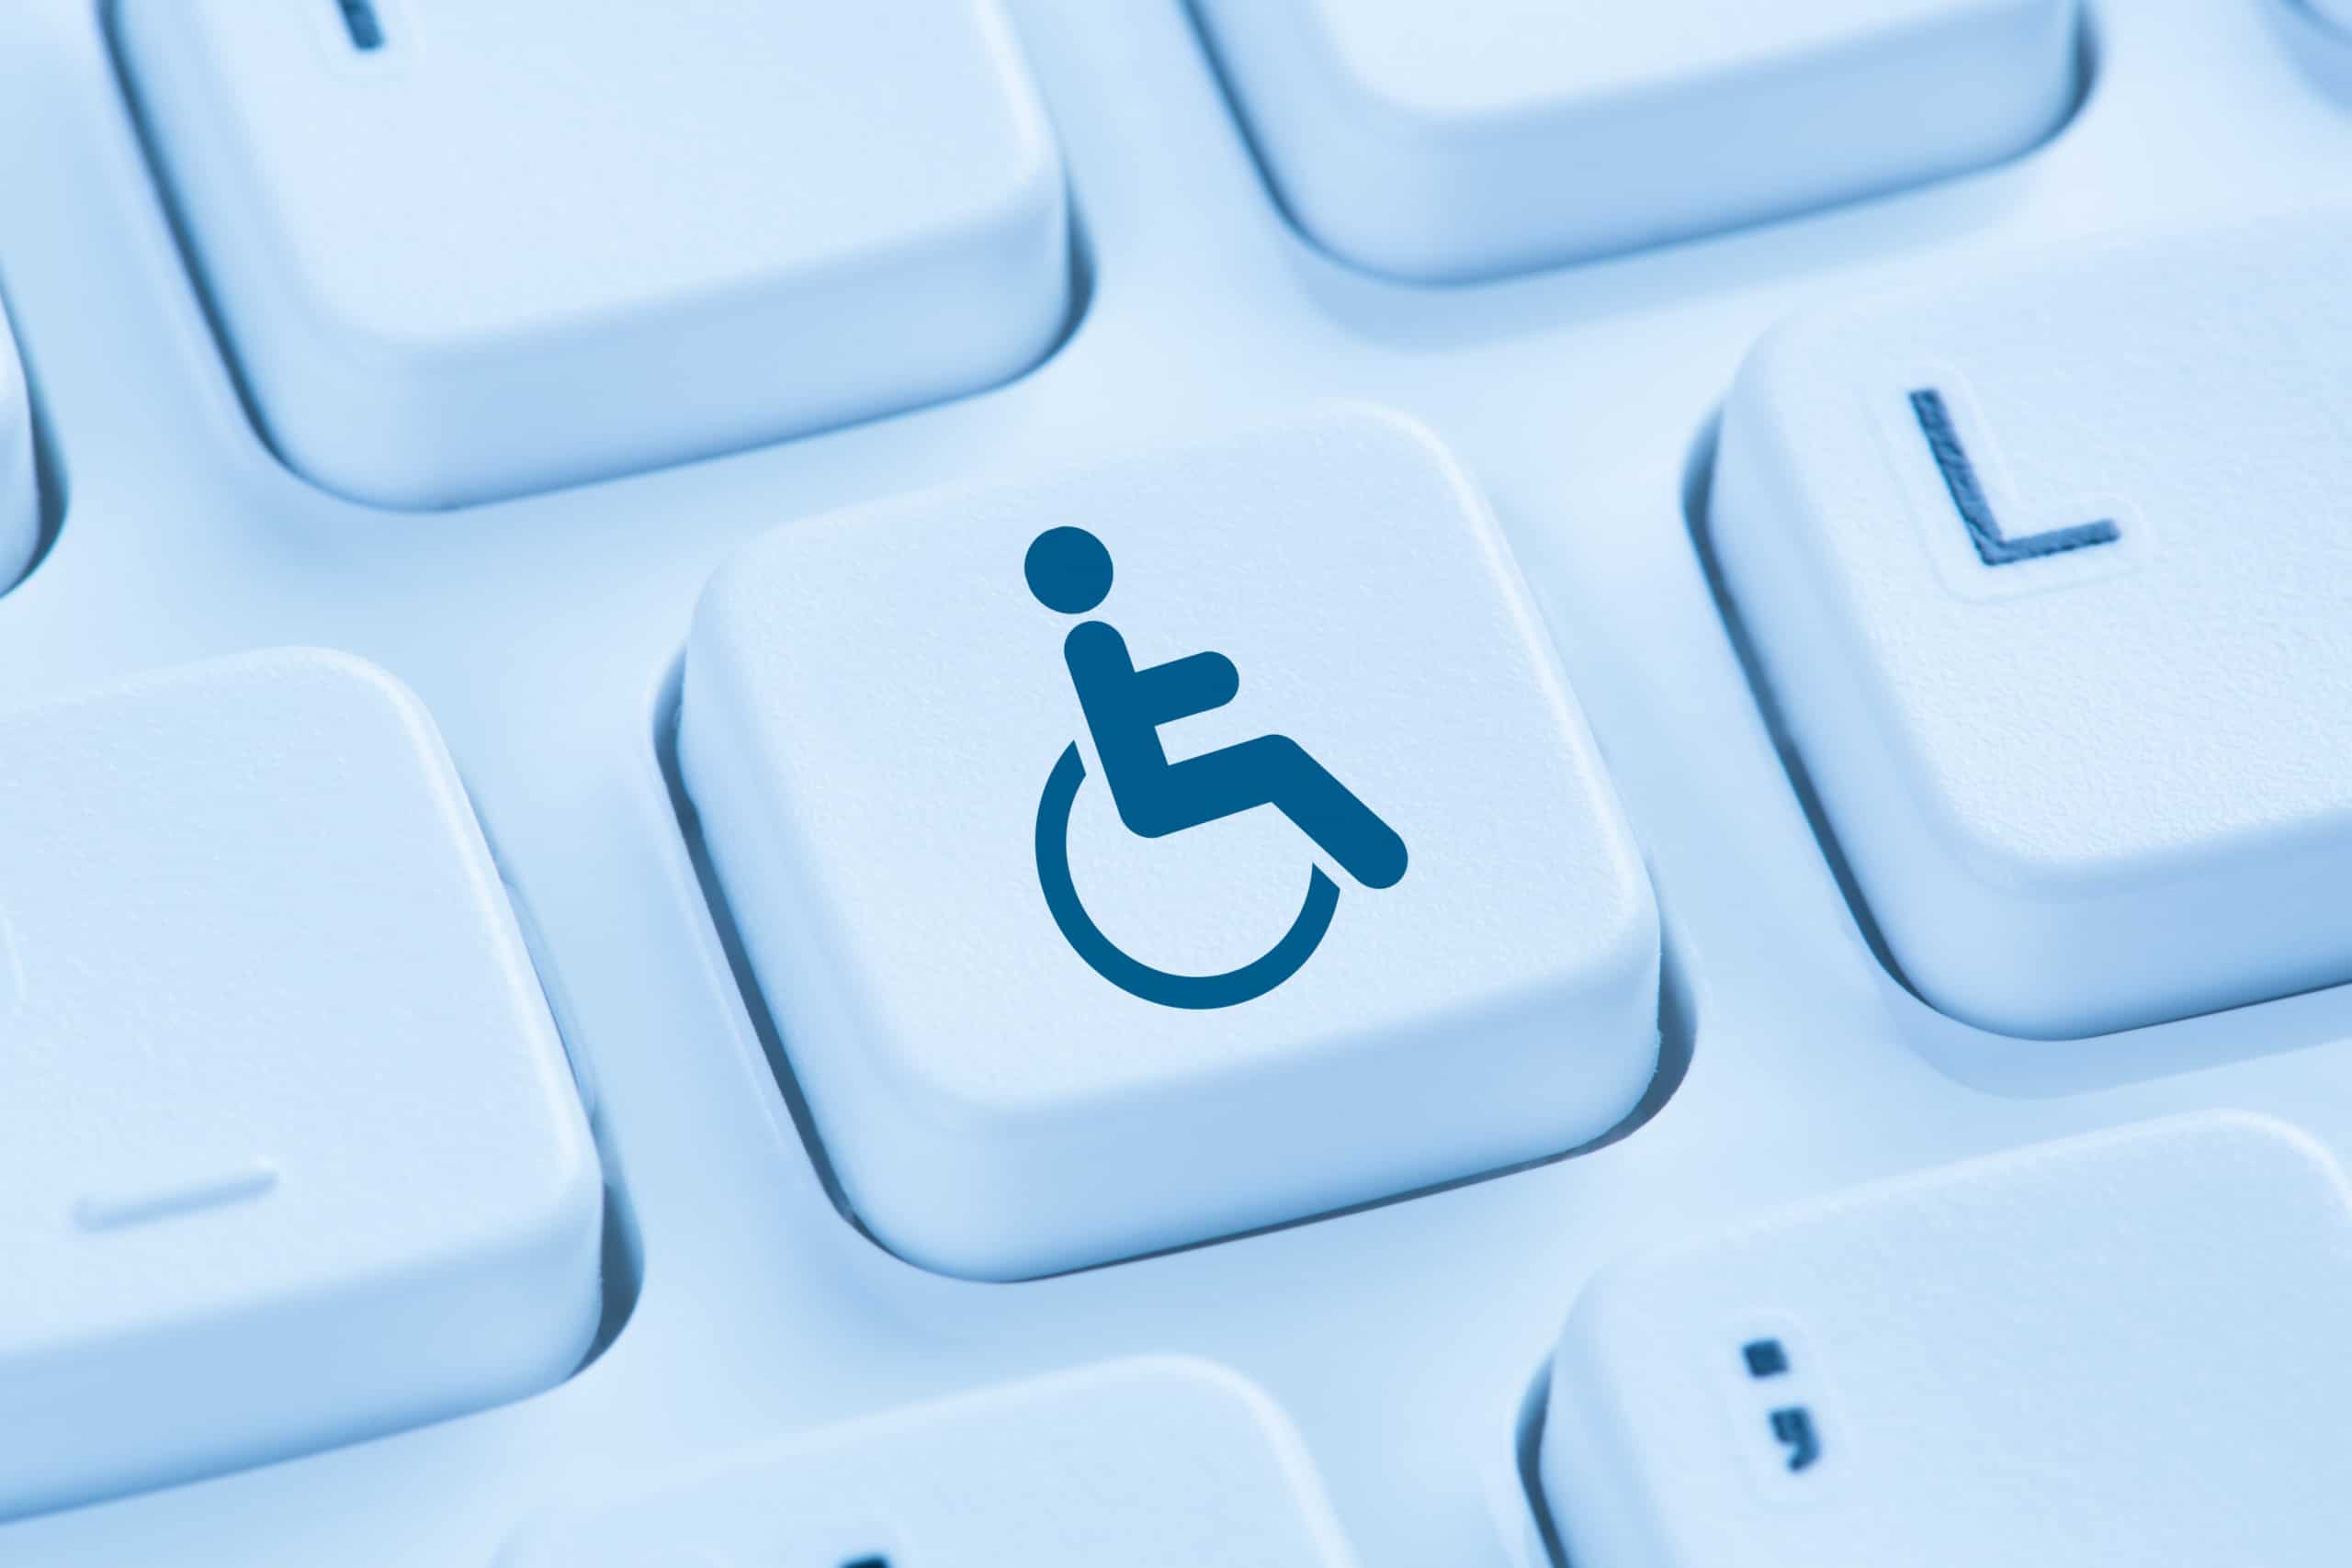 Digital Accessibility: Why It Matters and How to Build an Accessible Website